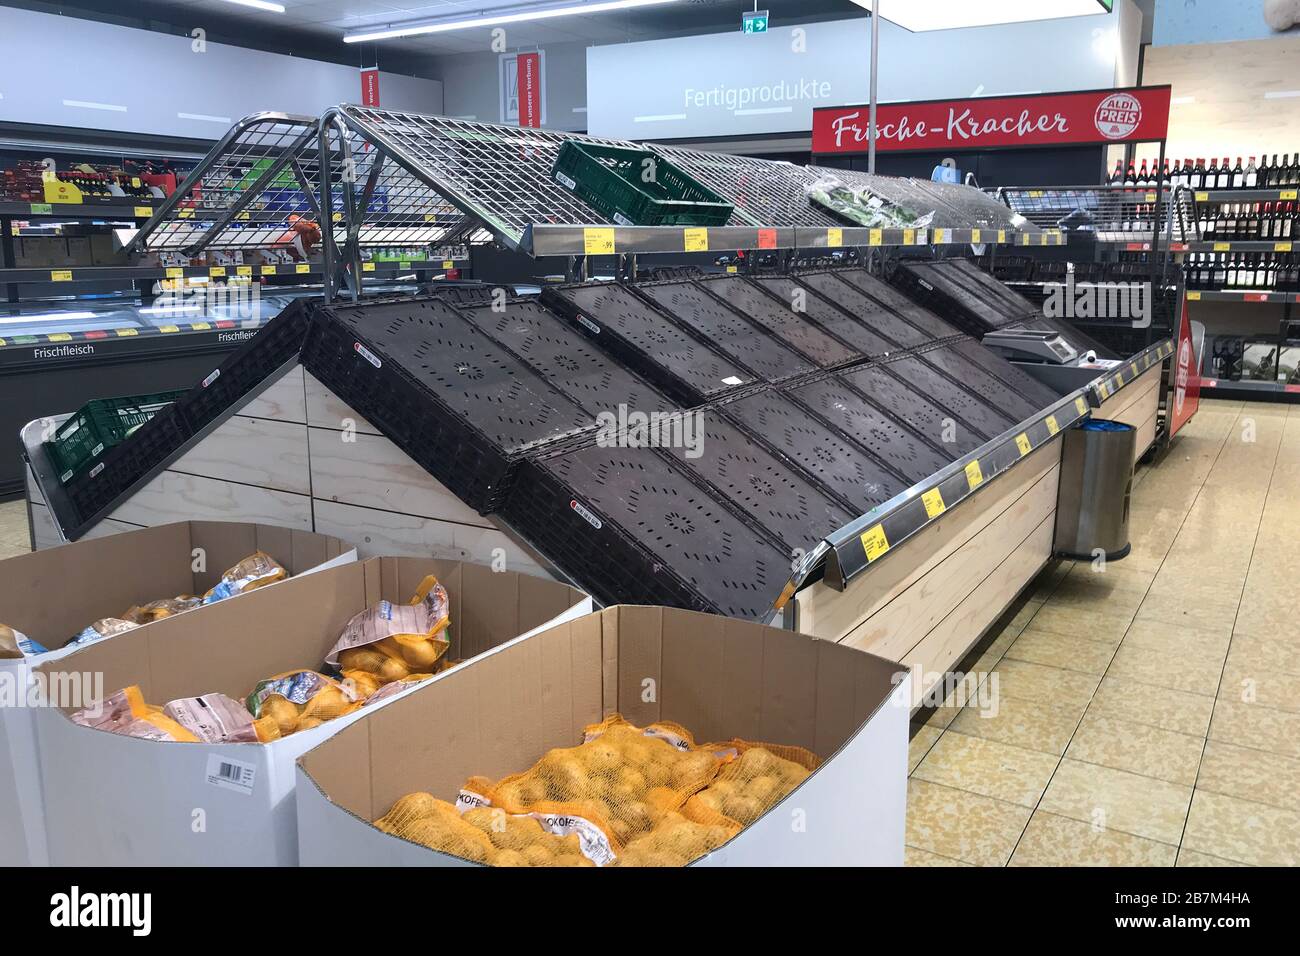 Short sales in supermarkets and discounters are becoming more and more  extreme! Panic among consumers is increasing, no fresh fruit and no fresh  fruit and vegetable counter, empty shelves at discounters, like